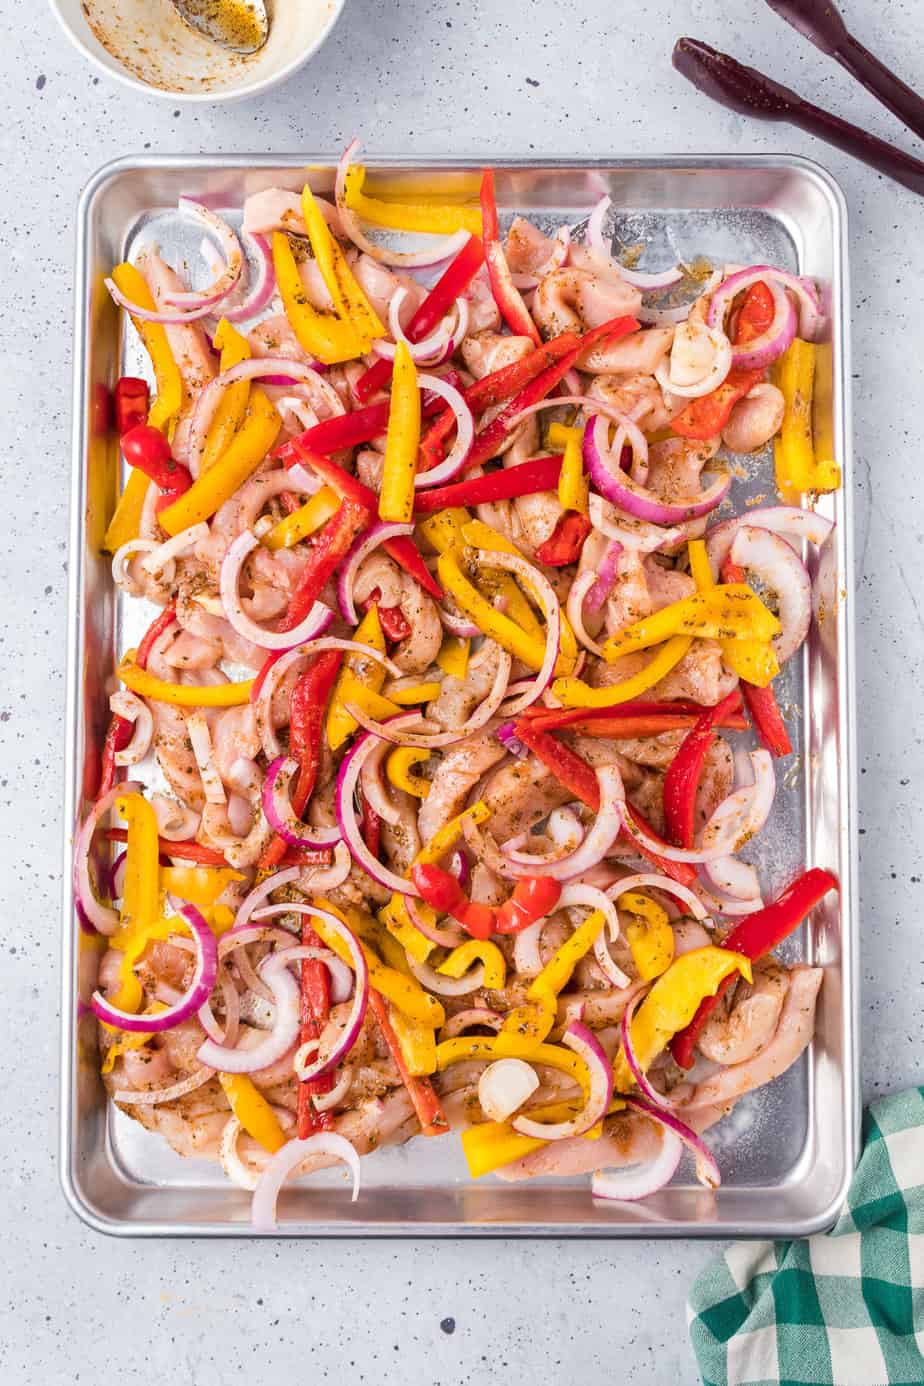 Raw chicken, bell peppers and onions cut into thin strips on a sheet pan tossed in oil and spices.